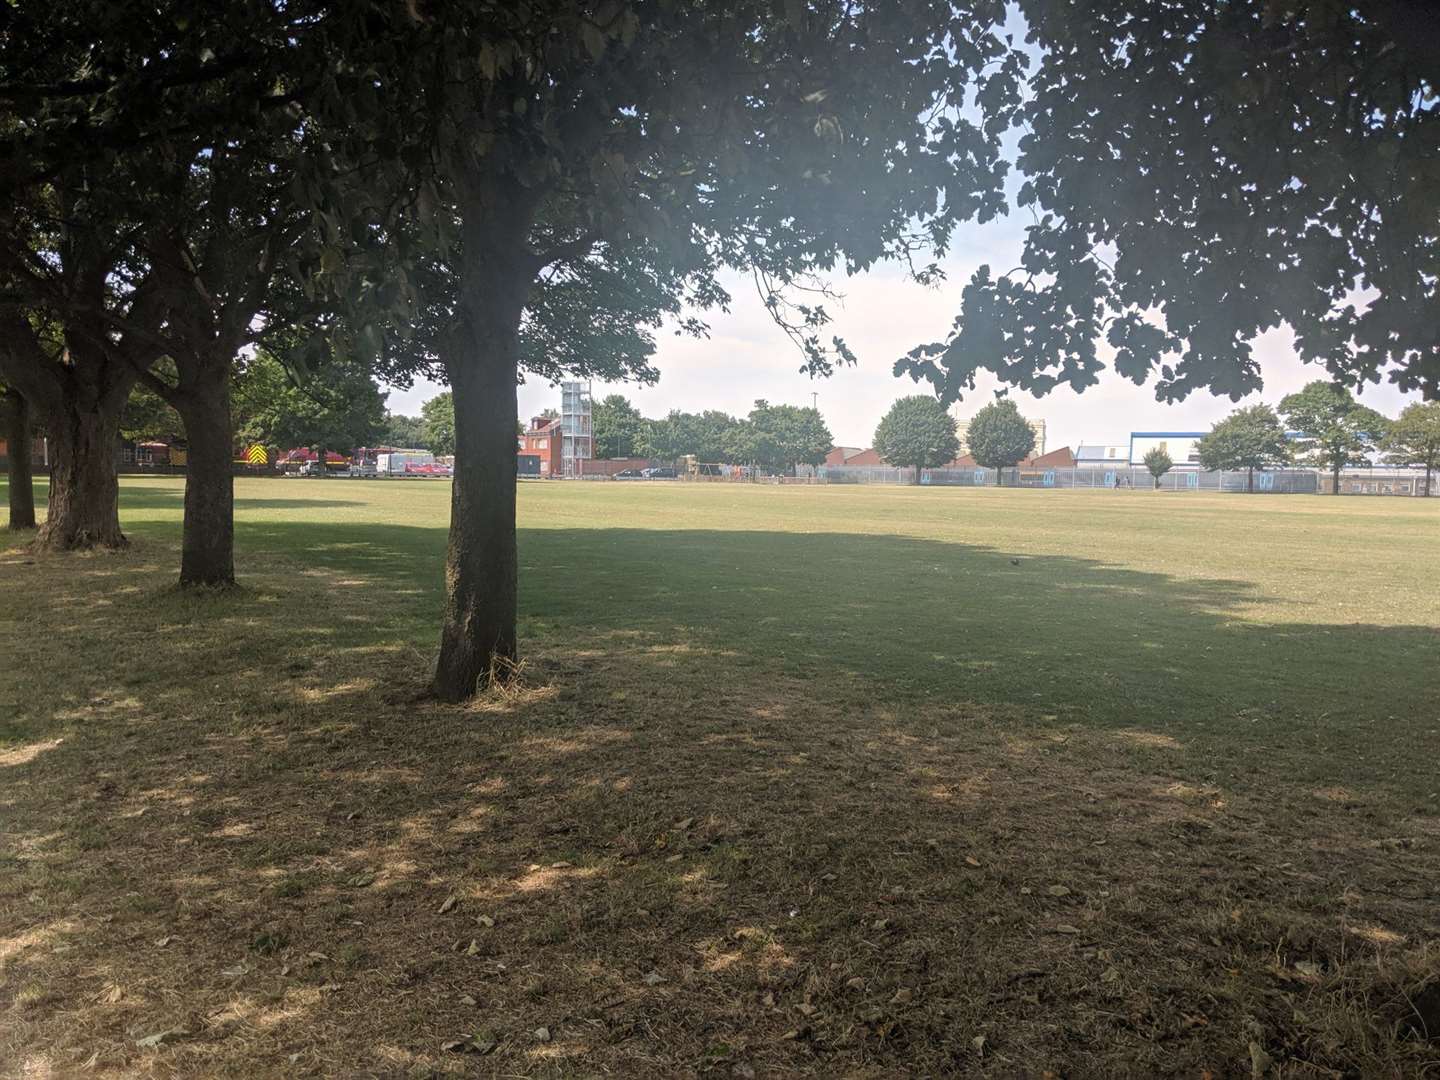 The attack happened in Warre Recreation Ground. Pic: thanet.gov.uk